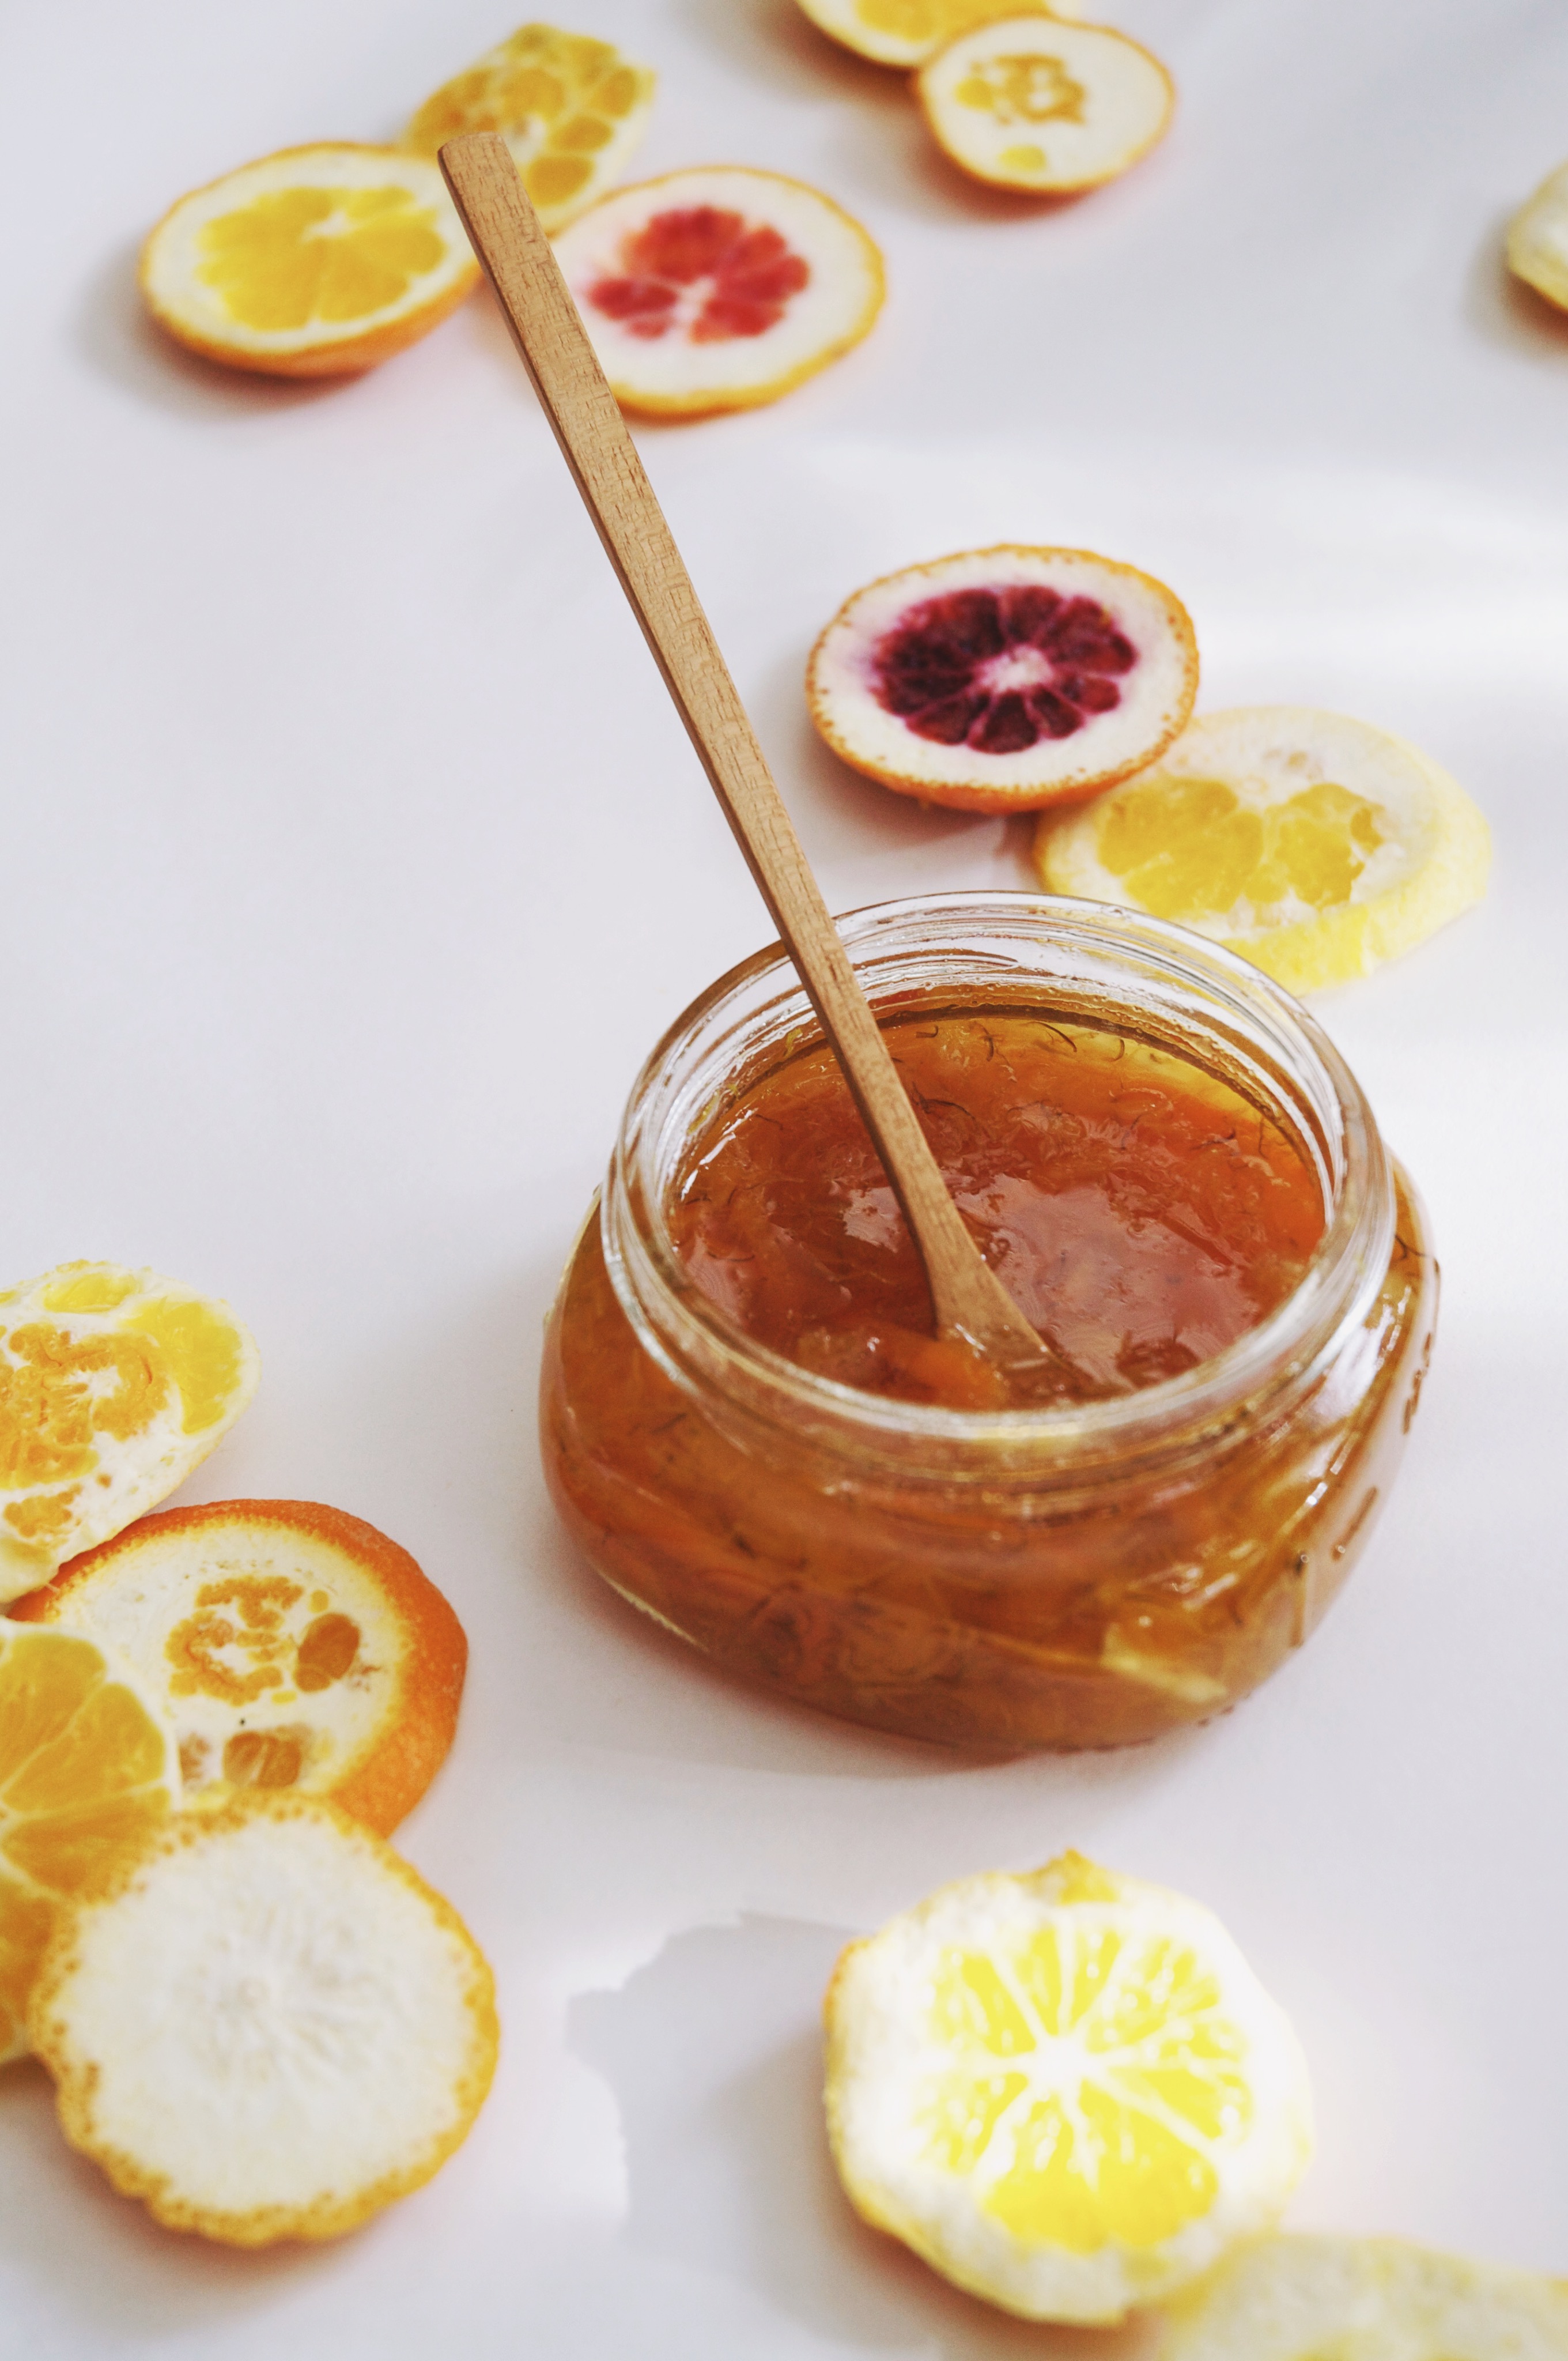 mixed citrus marmalade + thoughts on goals - holly + flora